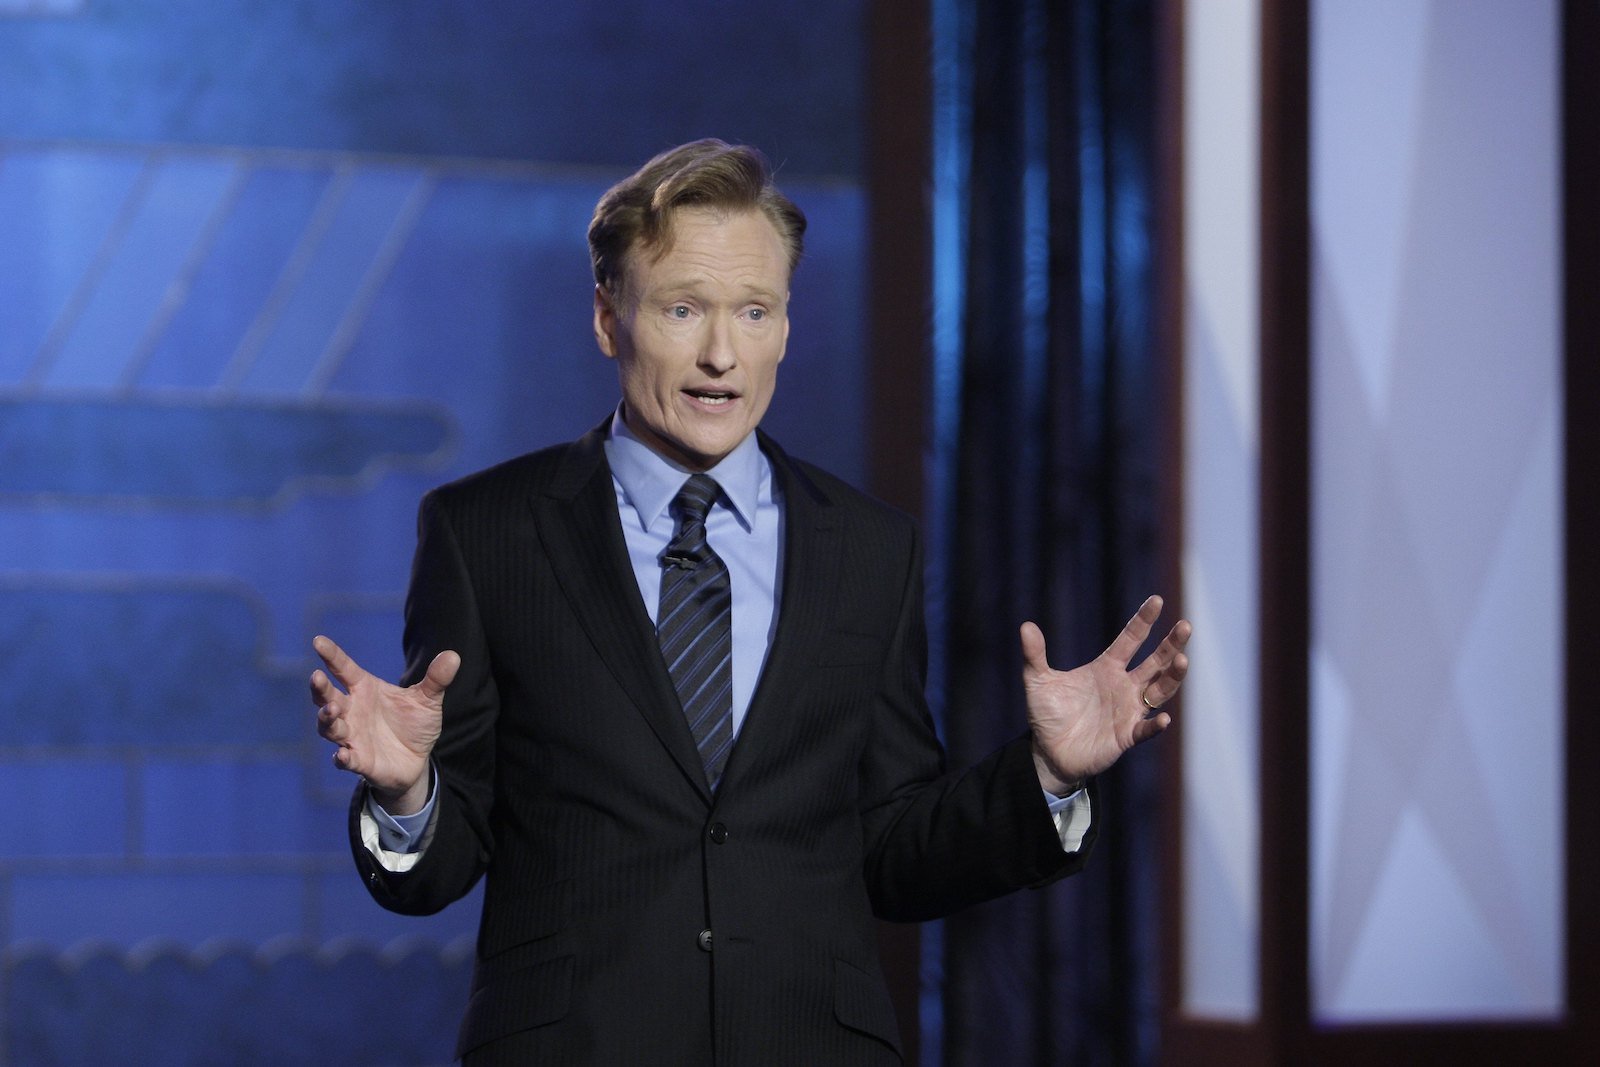 Conan O'Brien delivers his first monologue on June 1, 2009 on The Tonight Show